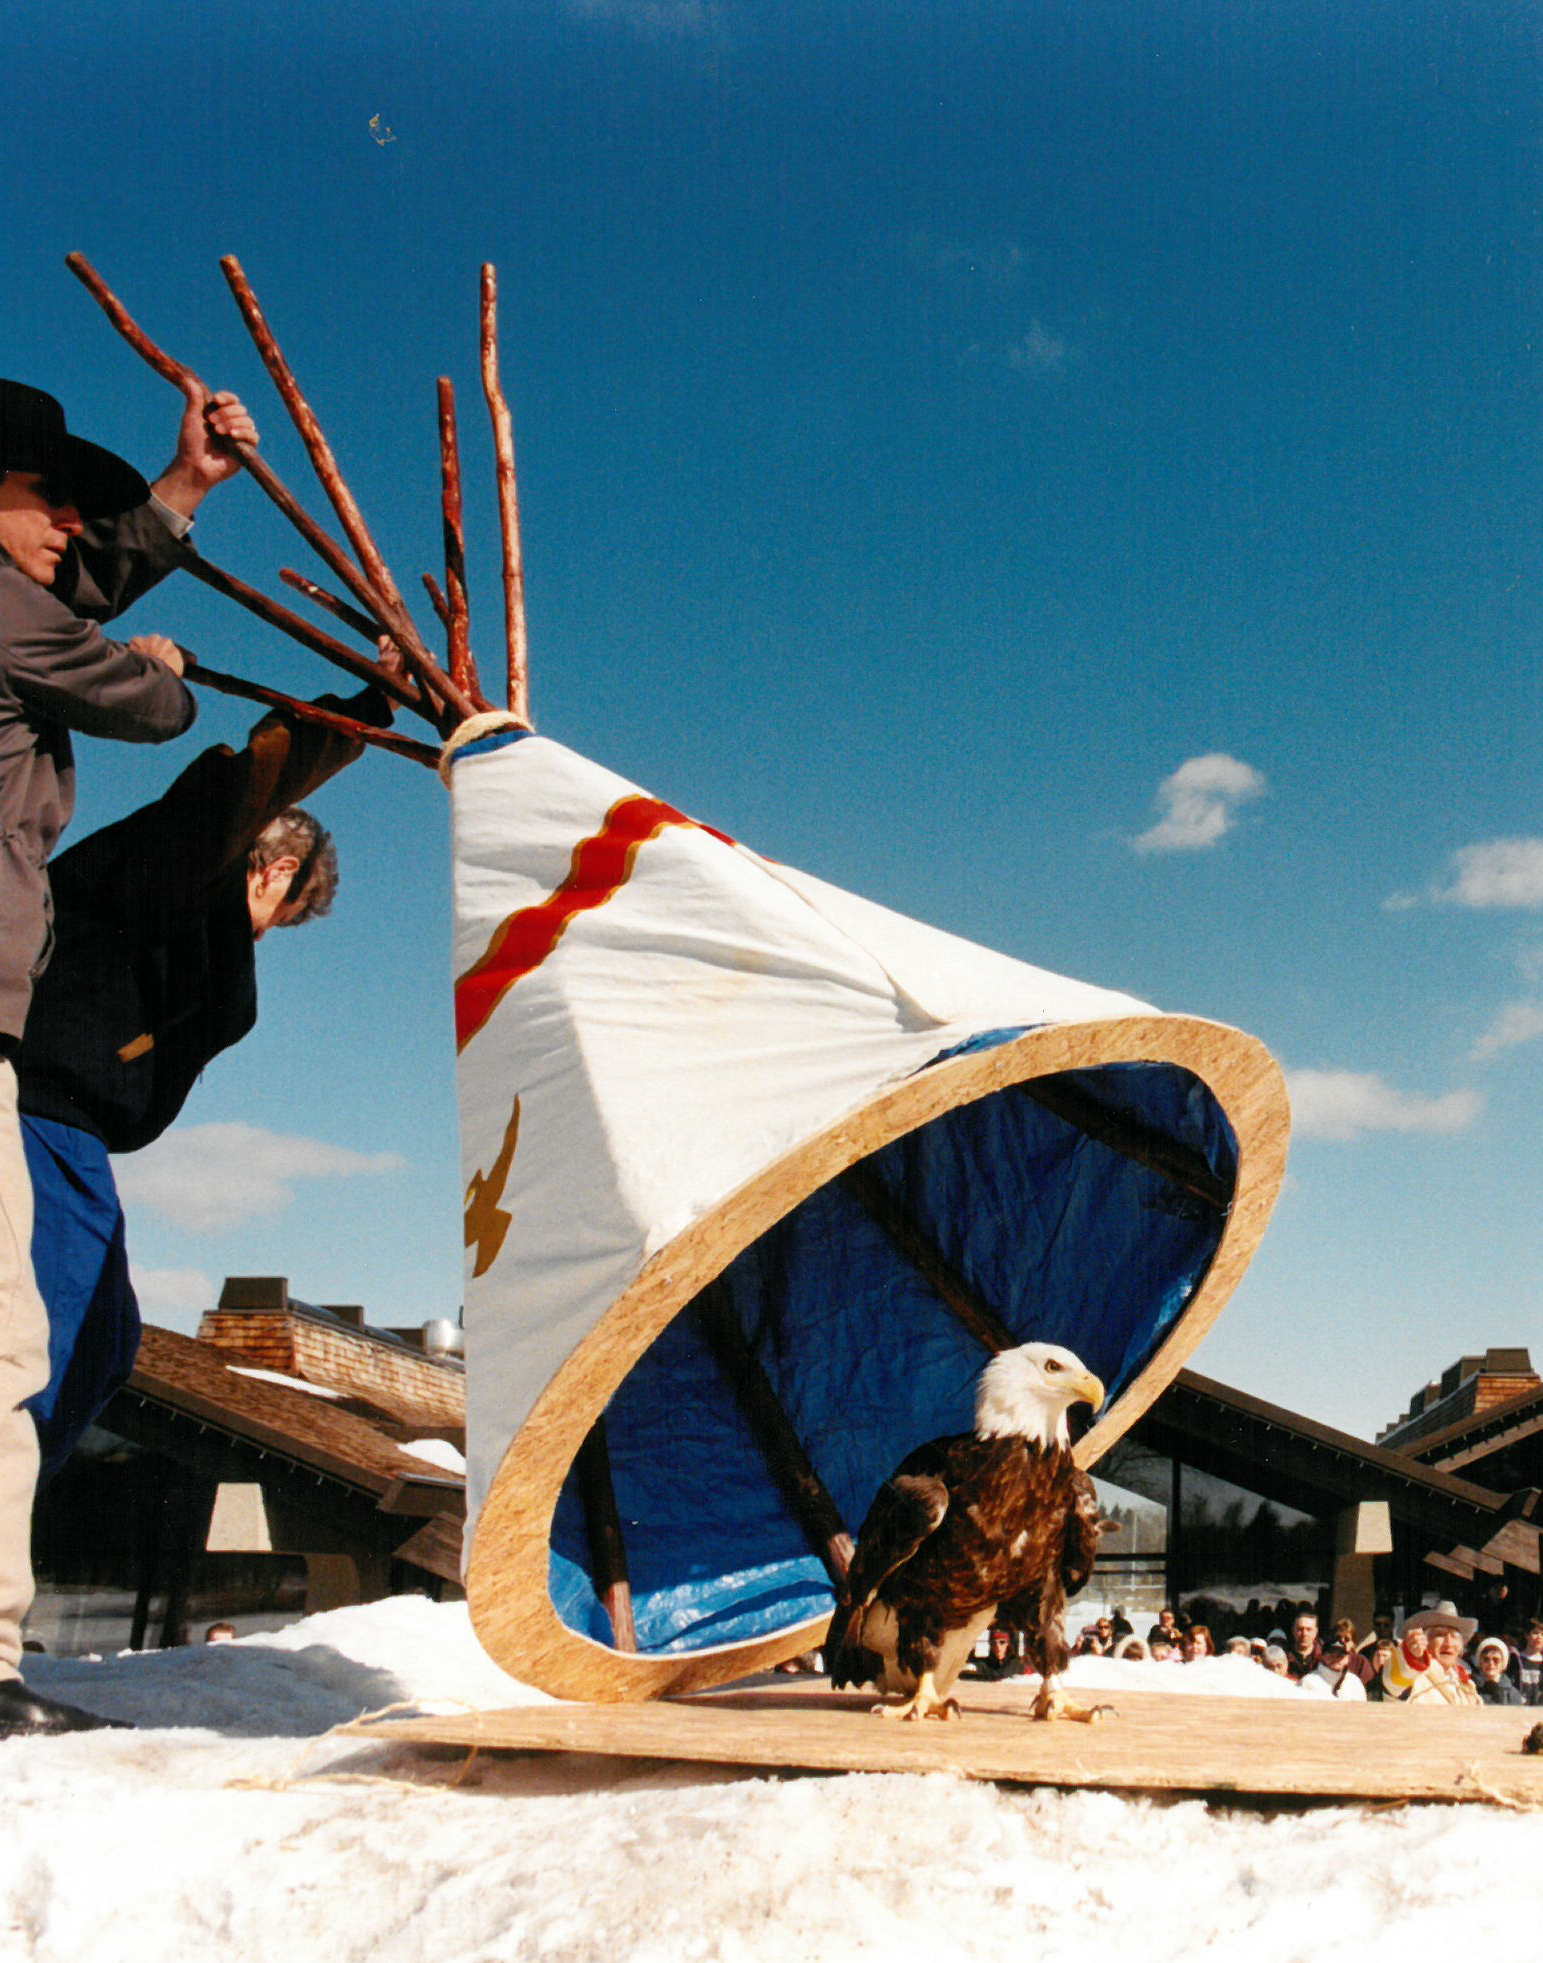 Photograph of an eagle being uncovered from a small tipi while a crowd watches in the background.